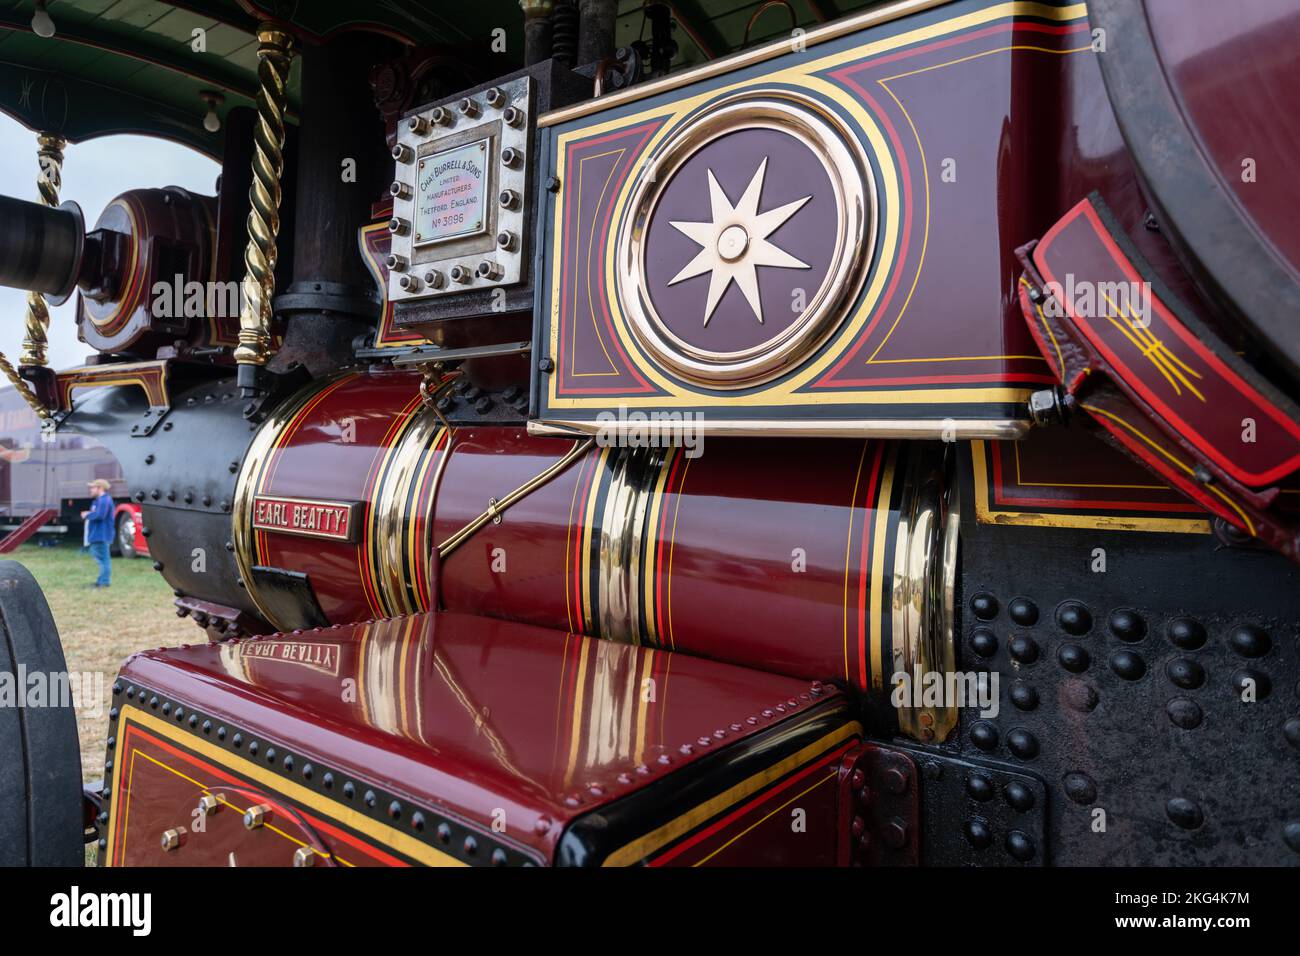 Tarrant Hinton.Dorset.United Kingdom.August 25th 2022.A 1921 Burrell showmans road locomtive called Earl Beatty is on display at the Great Dorset Stea Stock Photo